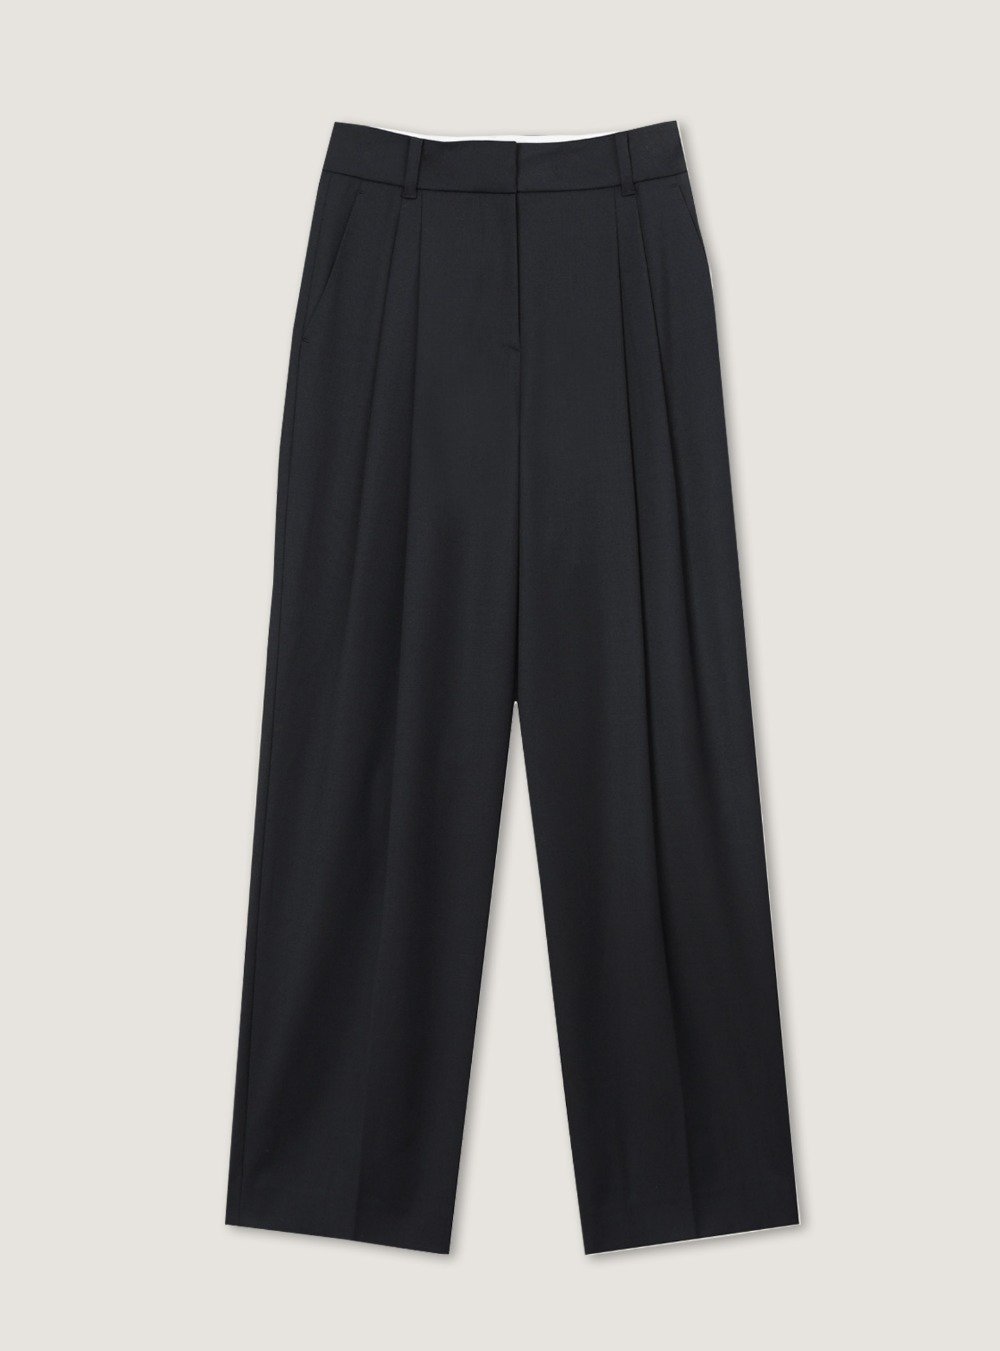 WOOL TWO TUCK WIDE PANTS - CHARCOAL